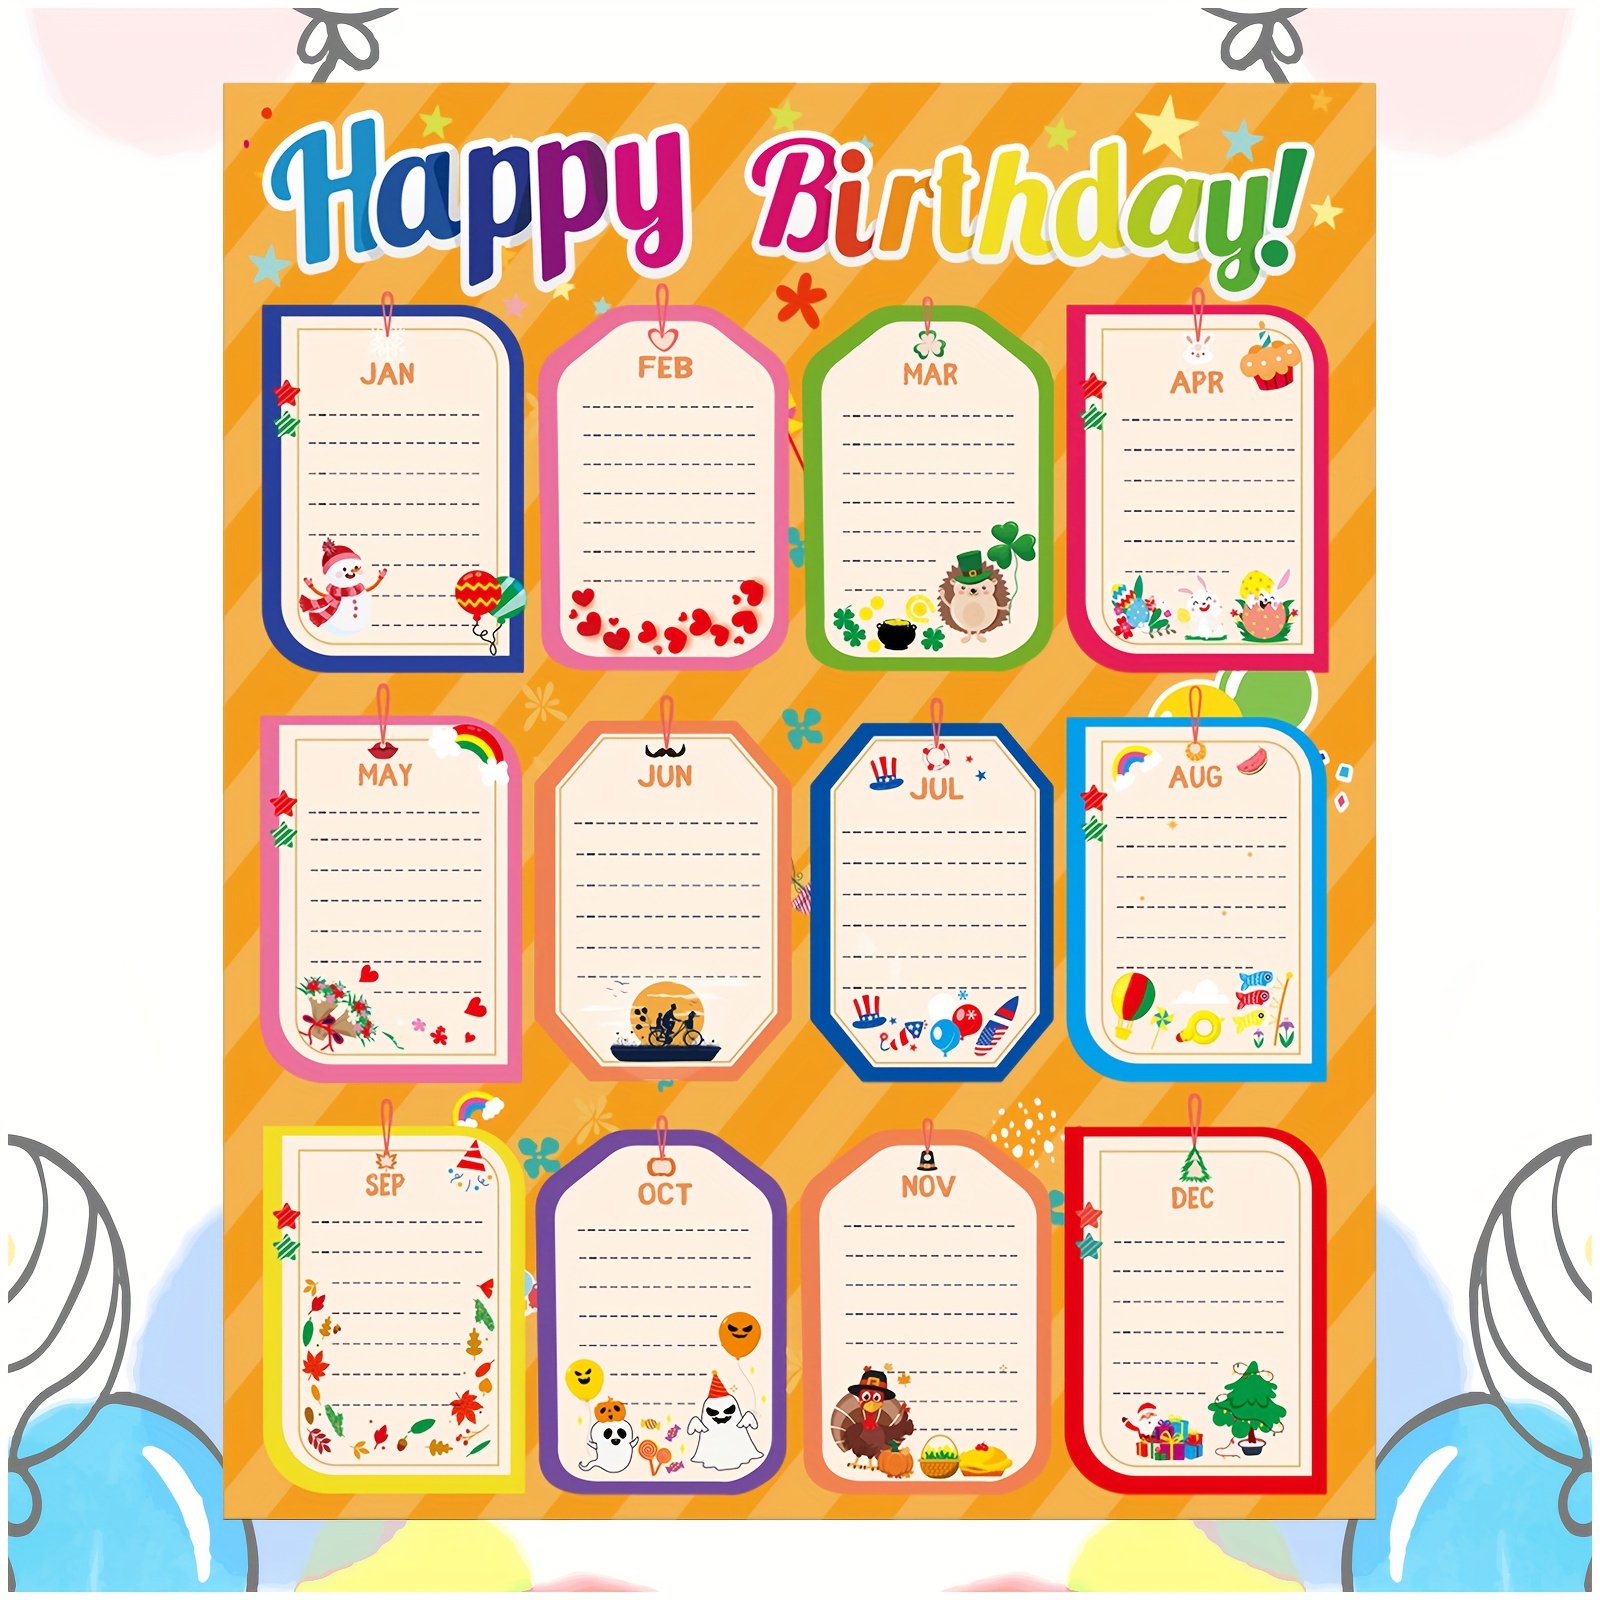 

2pcs Happy Birthday Months Posters - Classroom Calendar & Bulletin Board Decor, Gift Tags Included, Perfect For Party Wall Decorations, Teacher Supplies, 19.69" X 15.75", Frameless